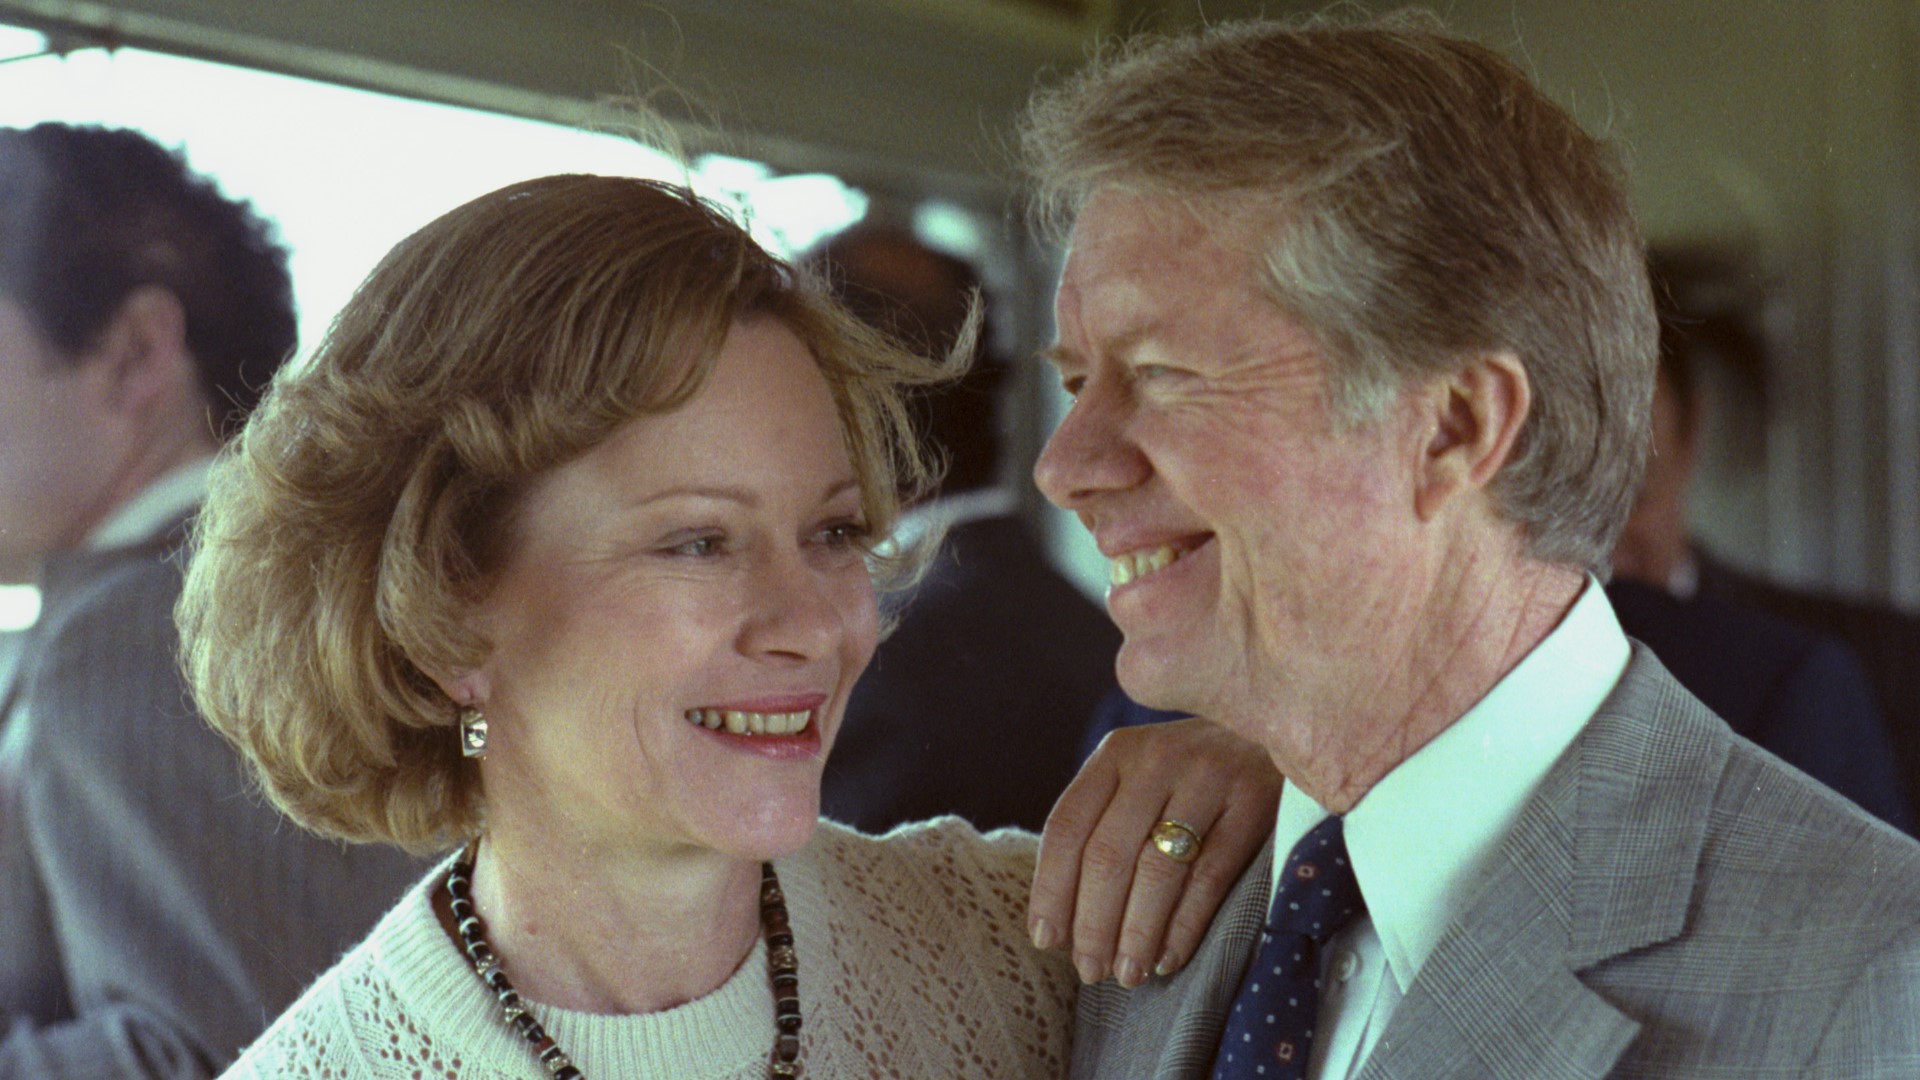 Rosalynn Carter, the former first lady and one-half of the longest presidential marriage in U.S. history, died Sunday at the age of 96.